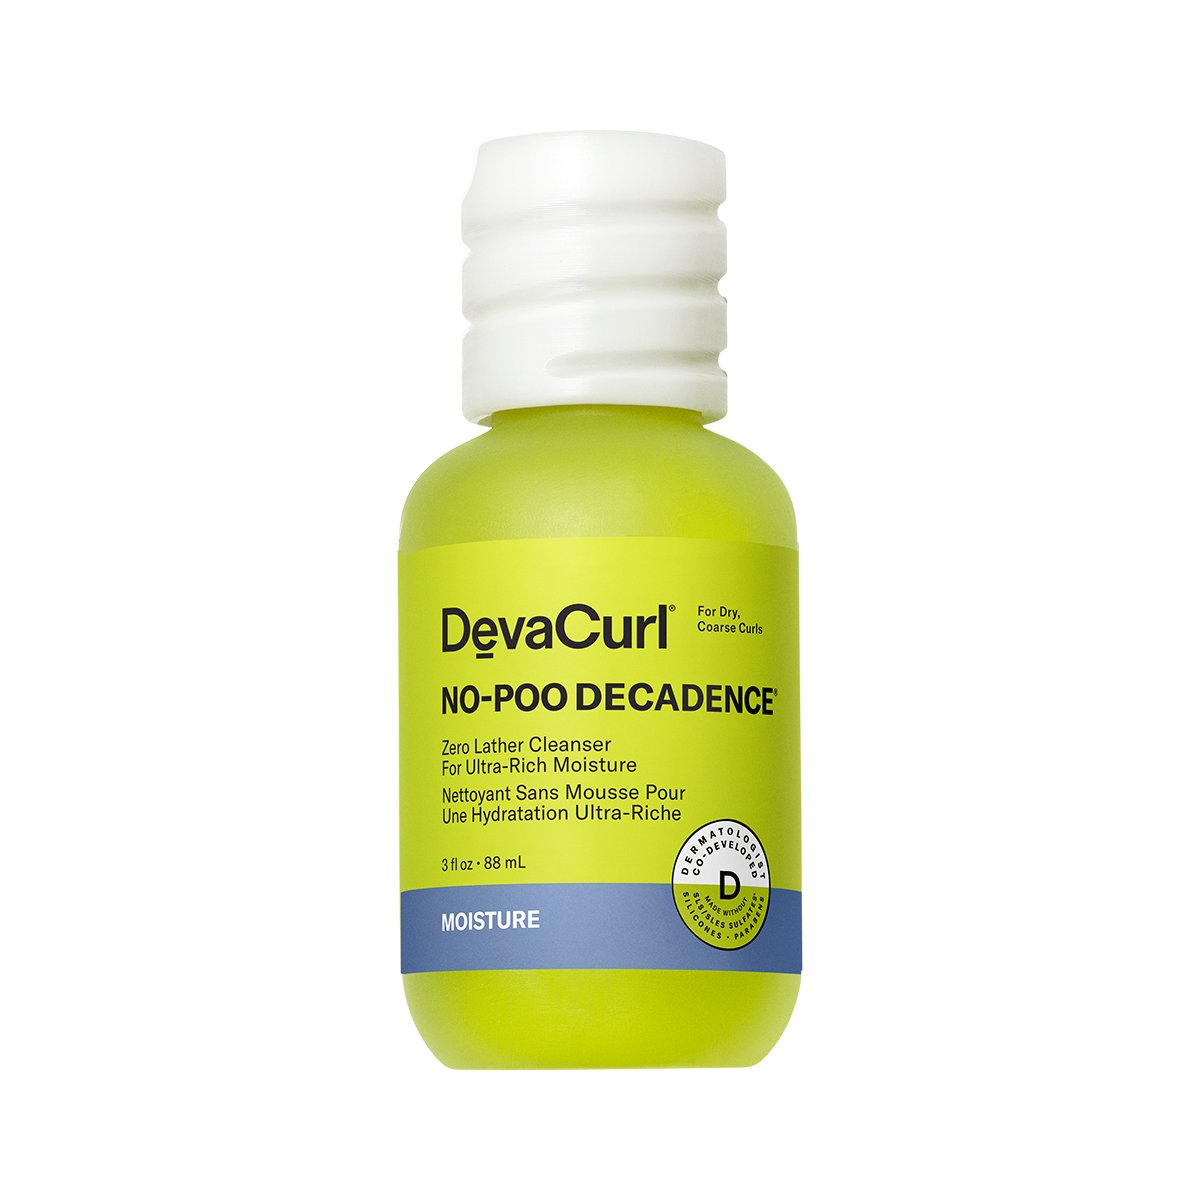 New! DevaCurl No-Poo Decadence - by Deva Curl |ProCare Outlet|